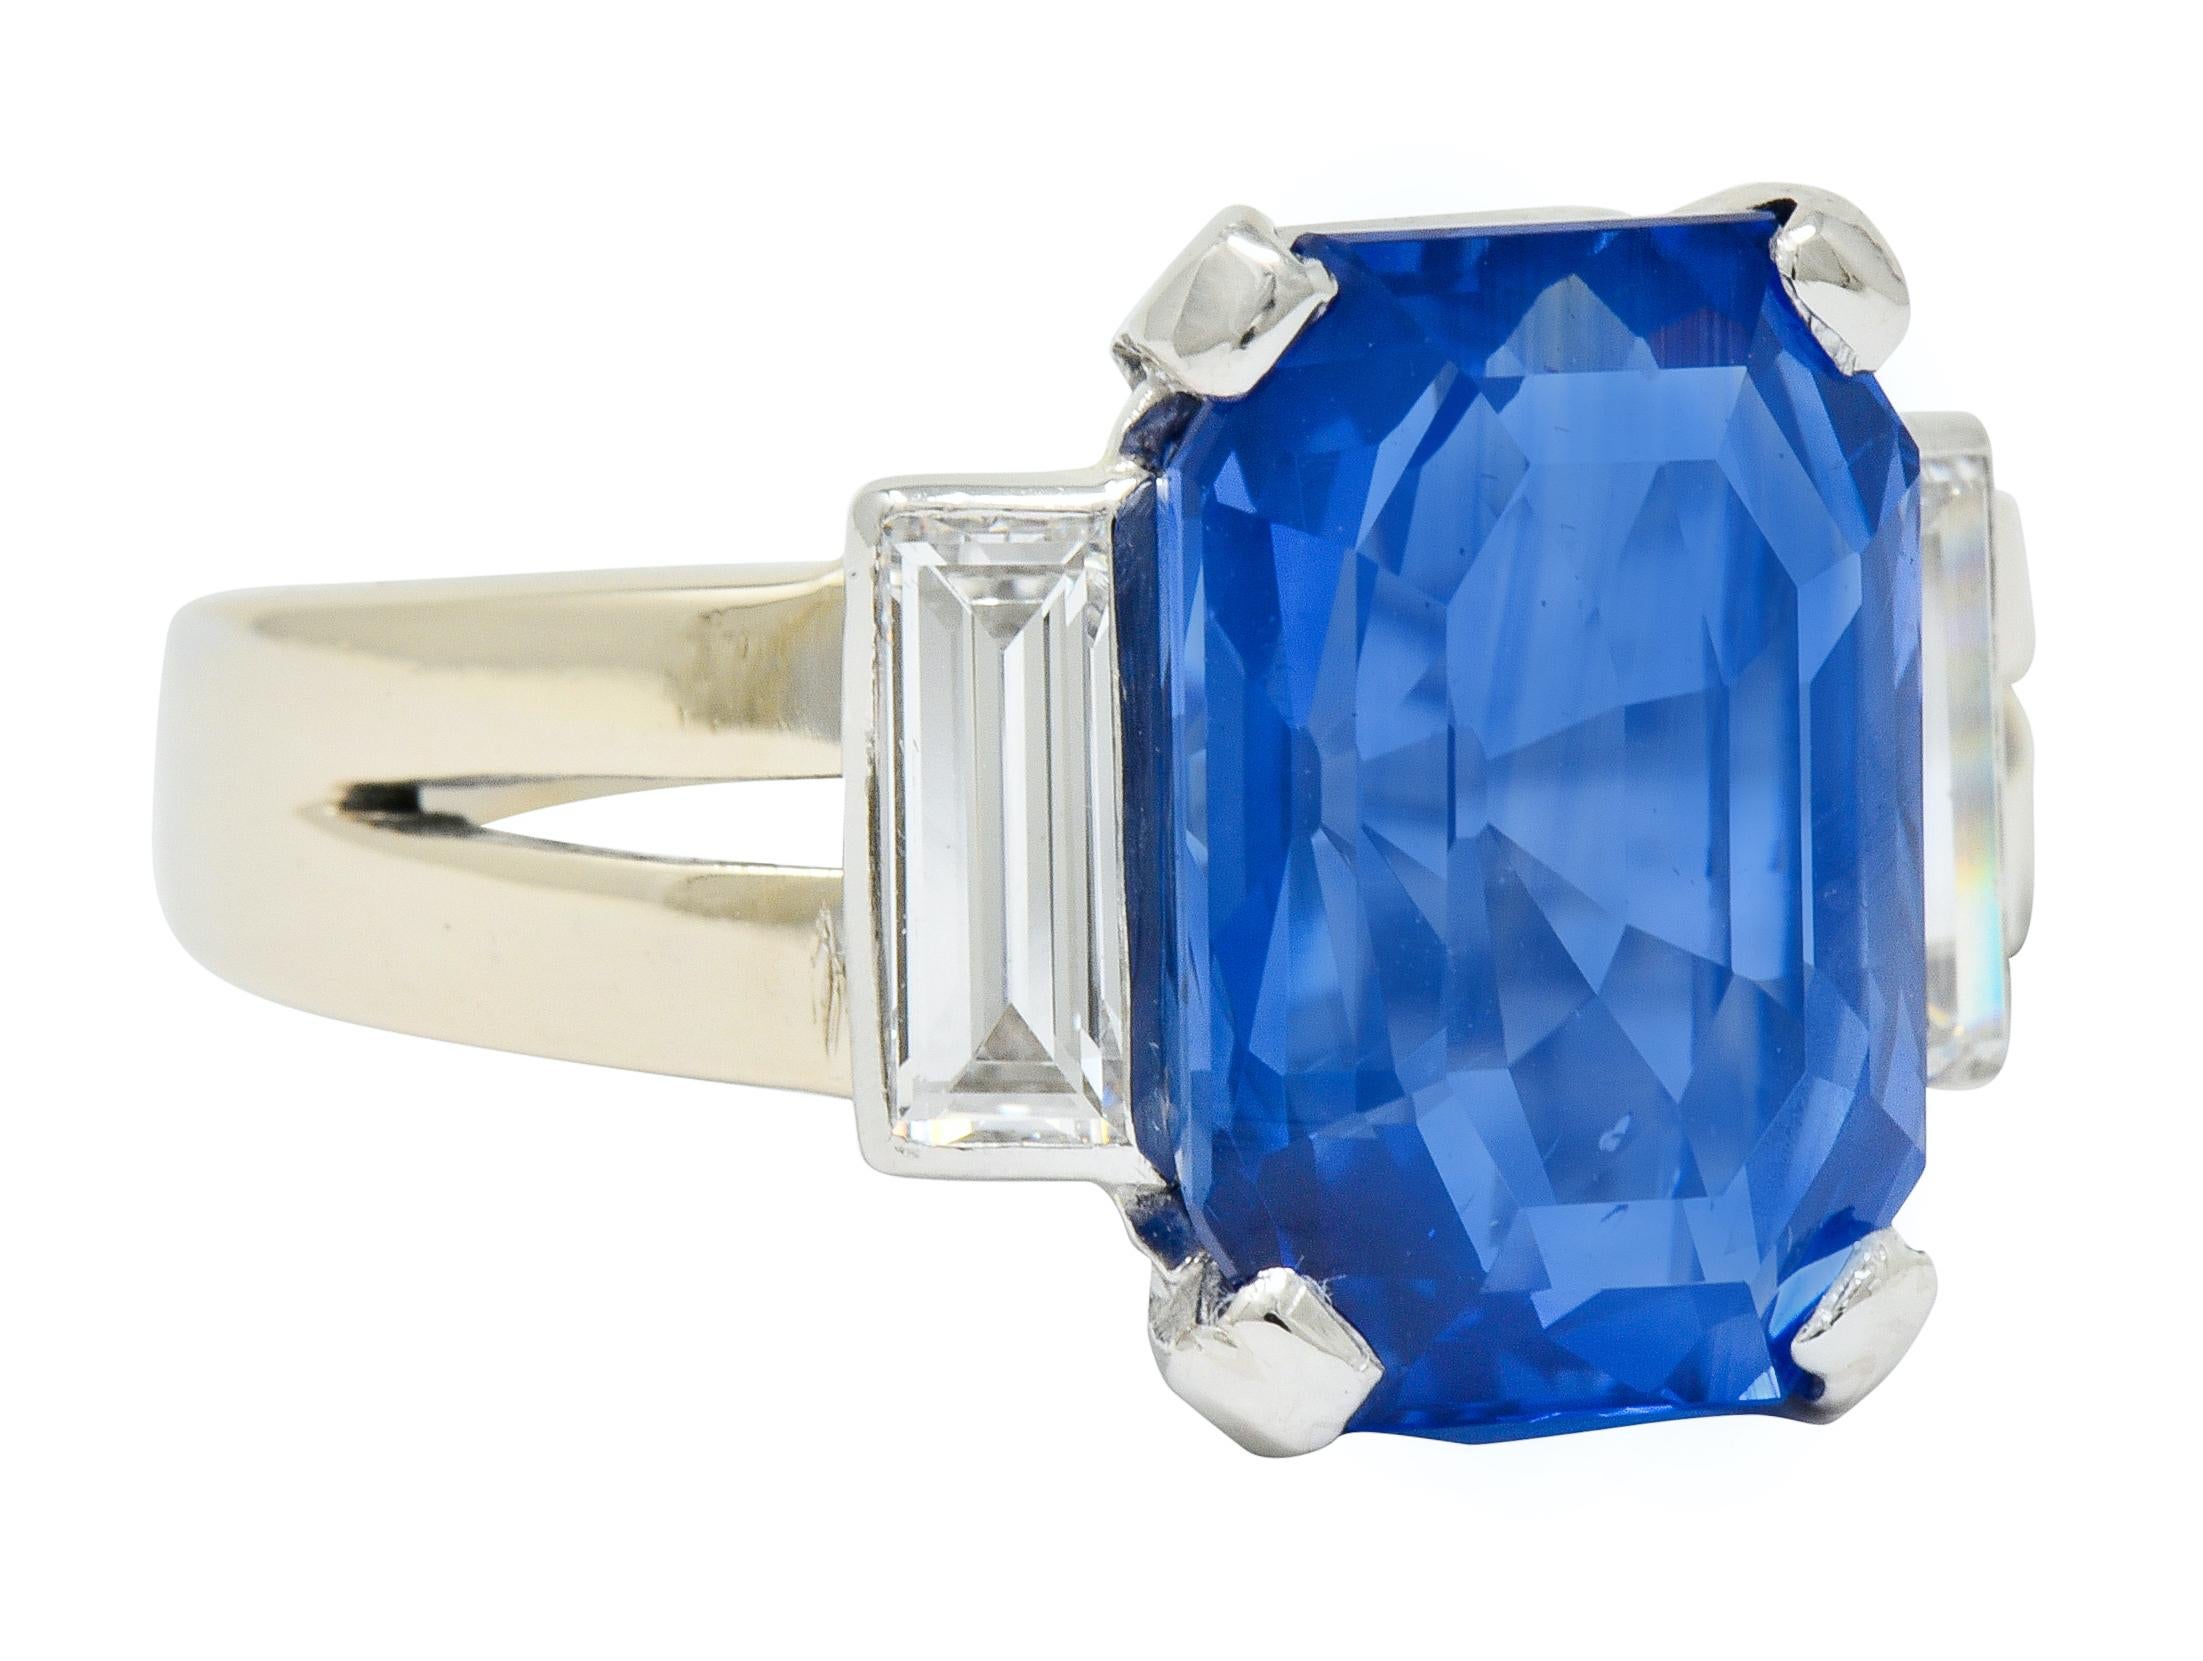 Centering a basket set emerald cut Ceylon sapphire weighing 9.00 carats

Transparent and cornflower blue in color with no indications of heat

Flanked by two bezel set rectangular step cut diamonds weighing approximately 0.72 carat, G/H color with